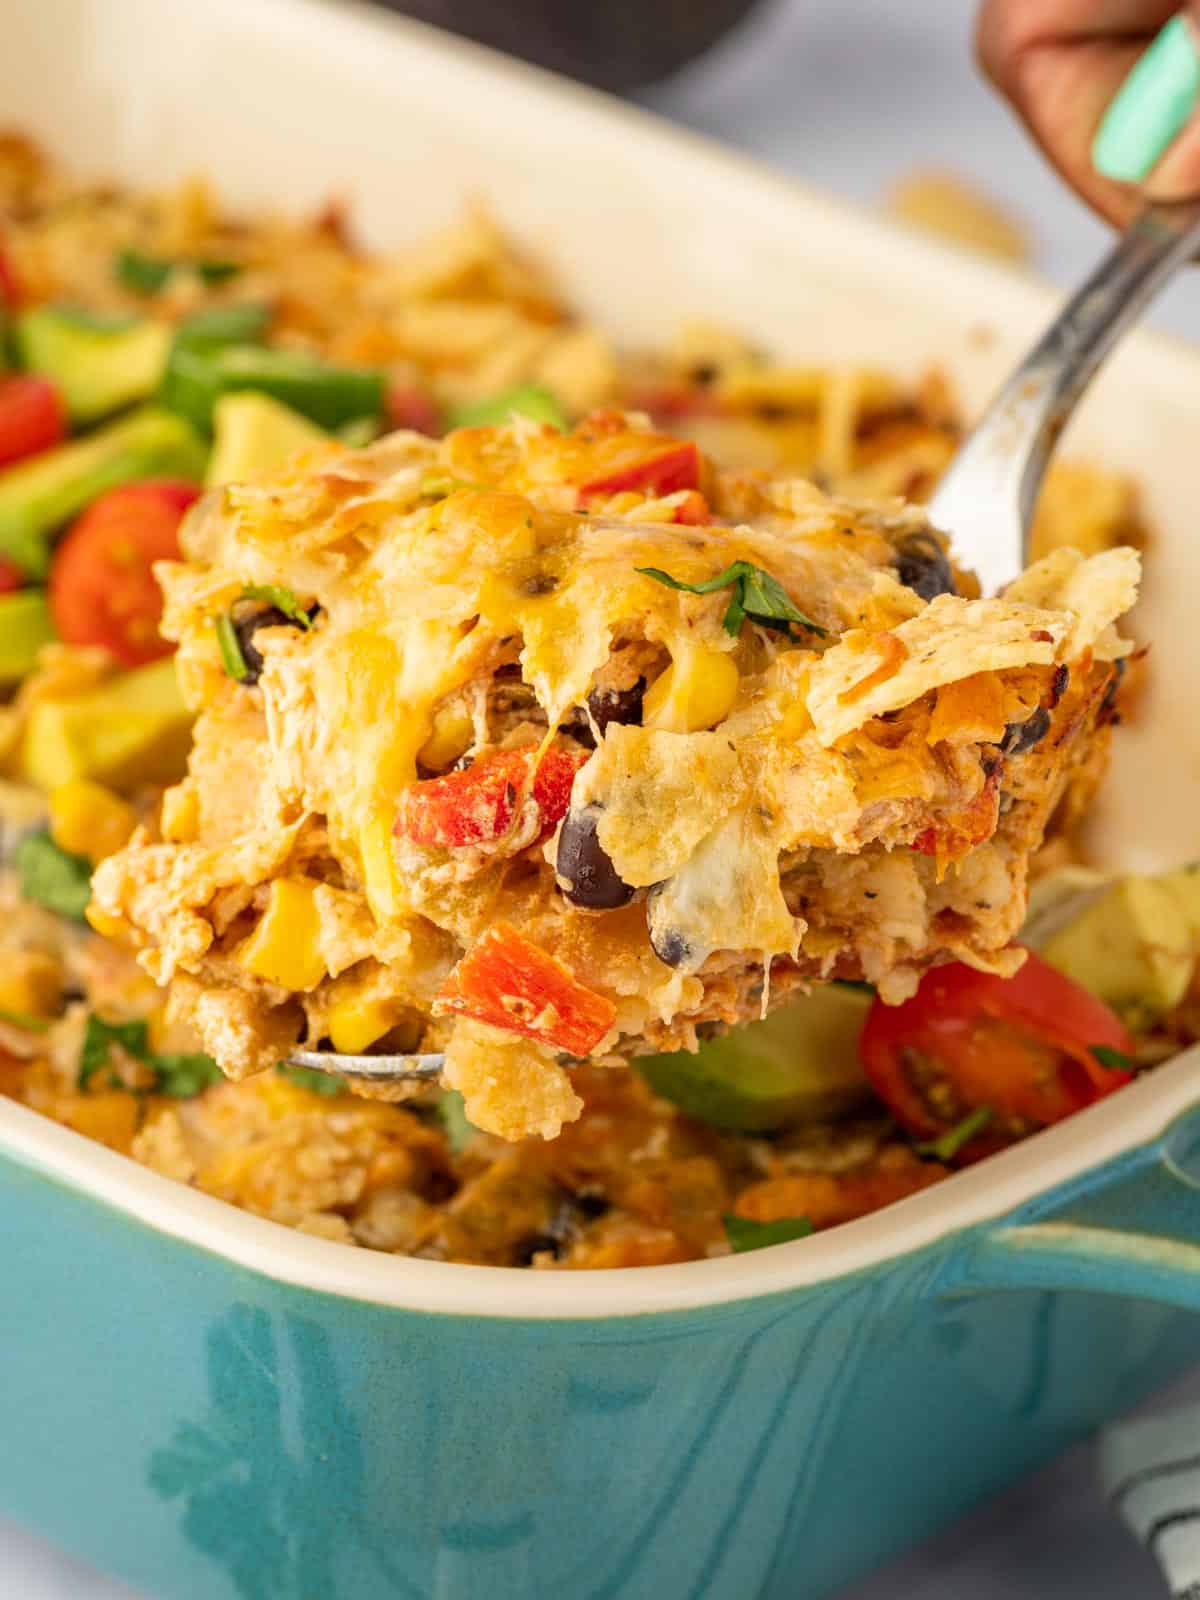 A spoon scoops out a serving of chicken Mexican casserole.